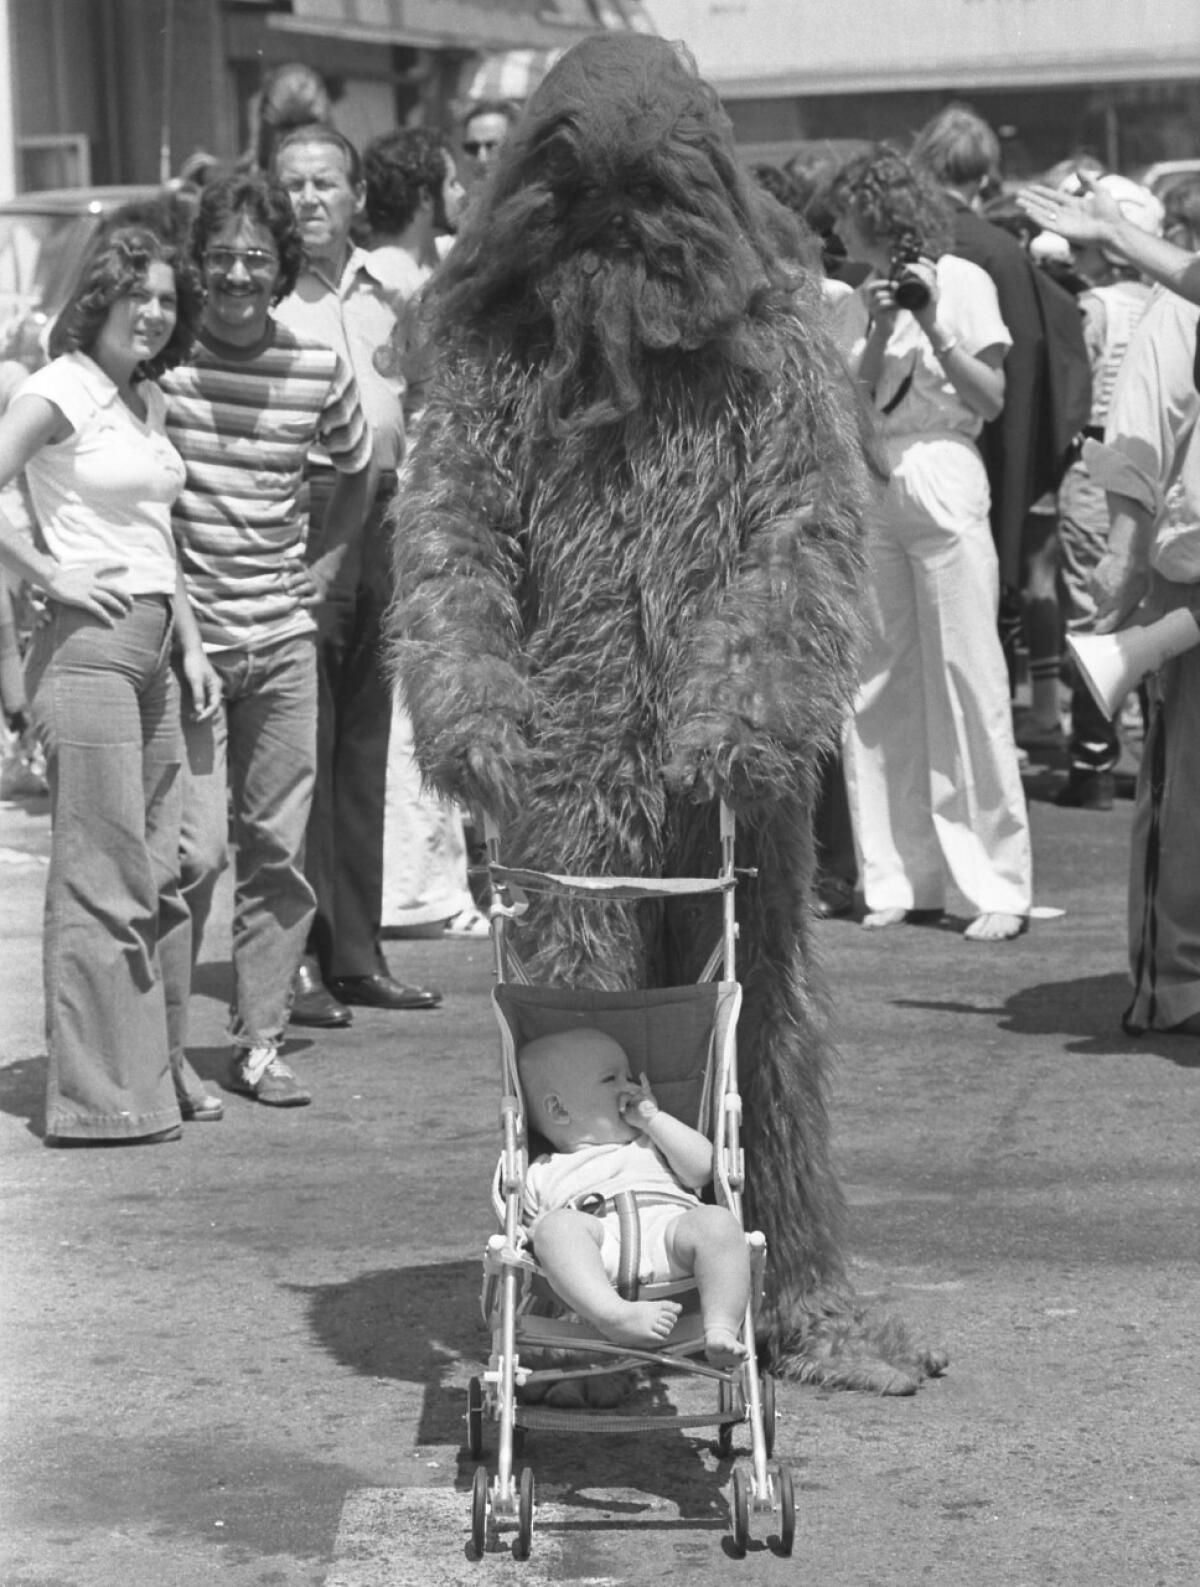 A man in a head-to-toe furry costume pushes an umbrella stroller with a baby in it.